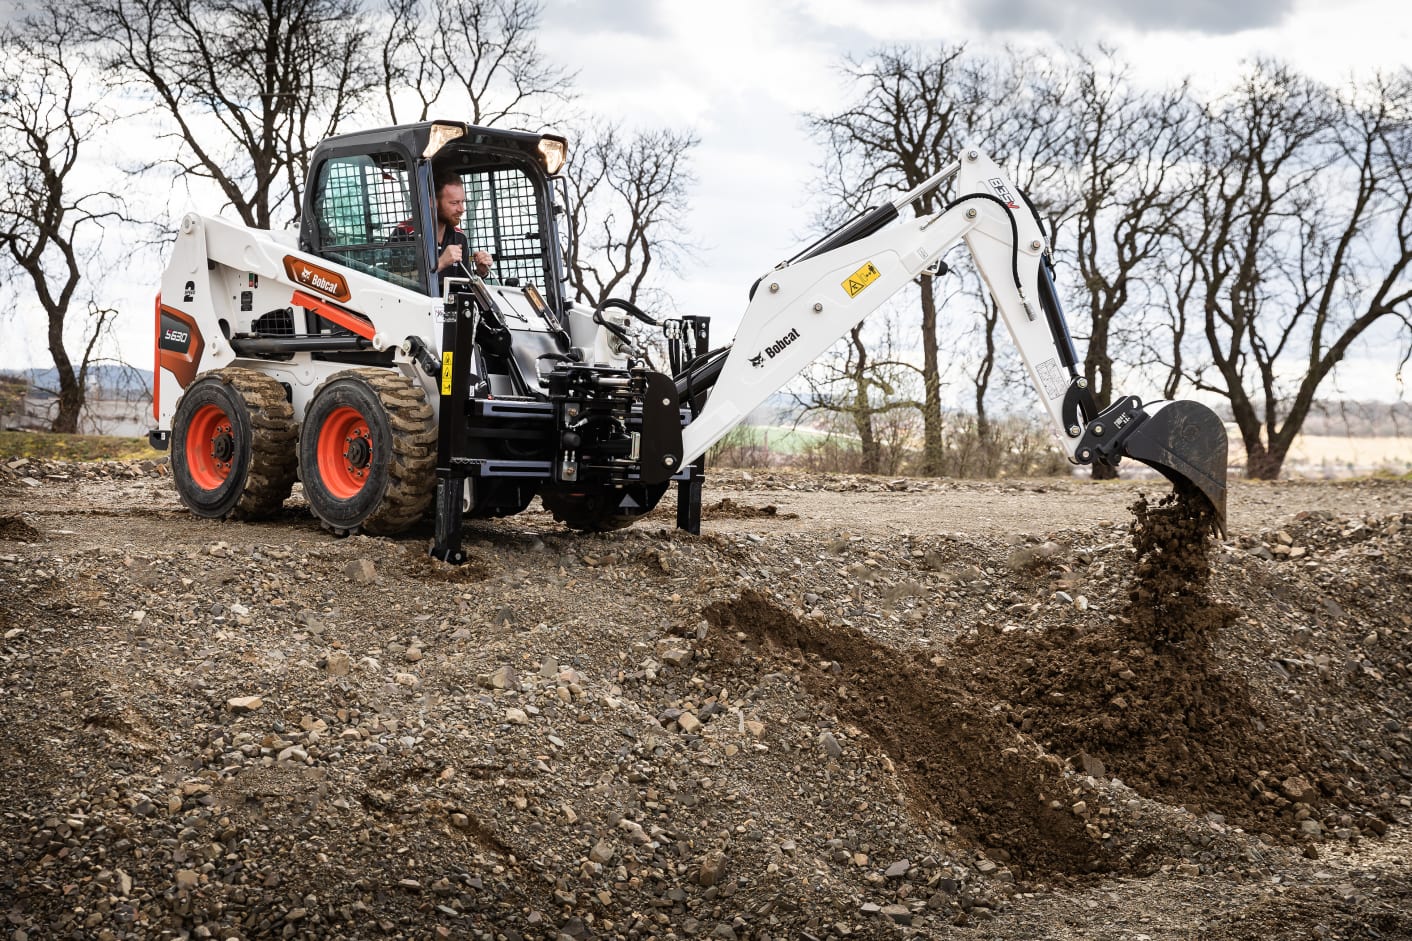 Browse Specs and more for the S630 Skid-Steer Loader - White Star Machinery